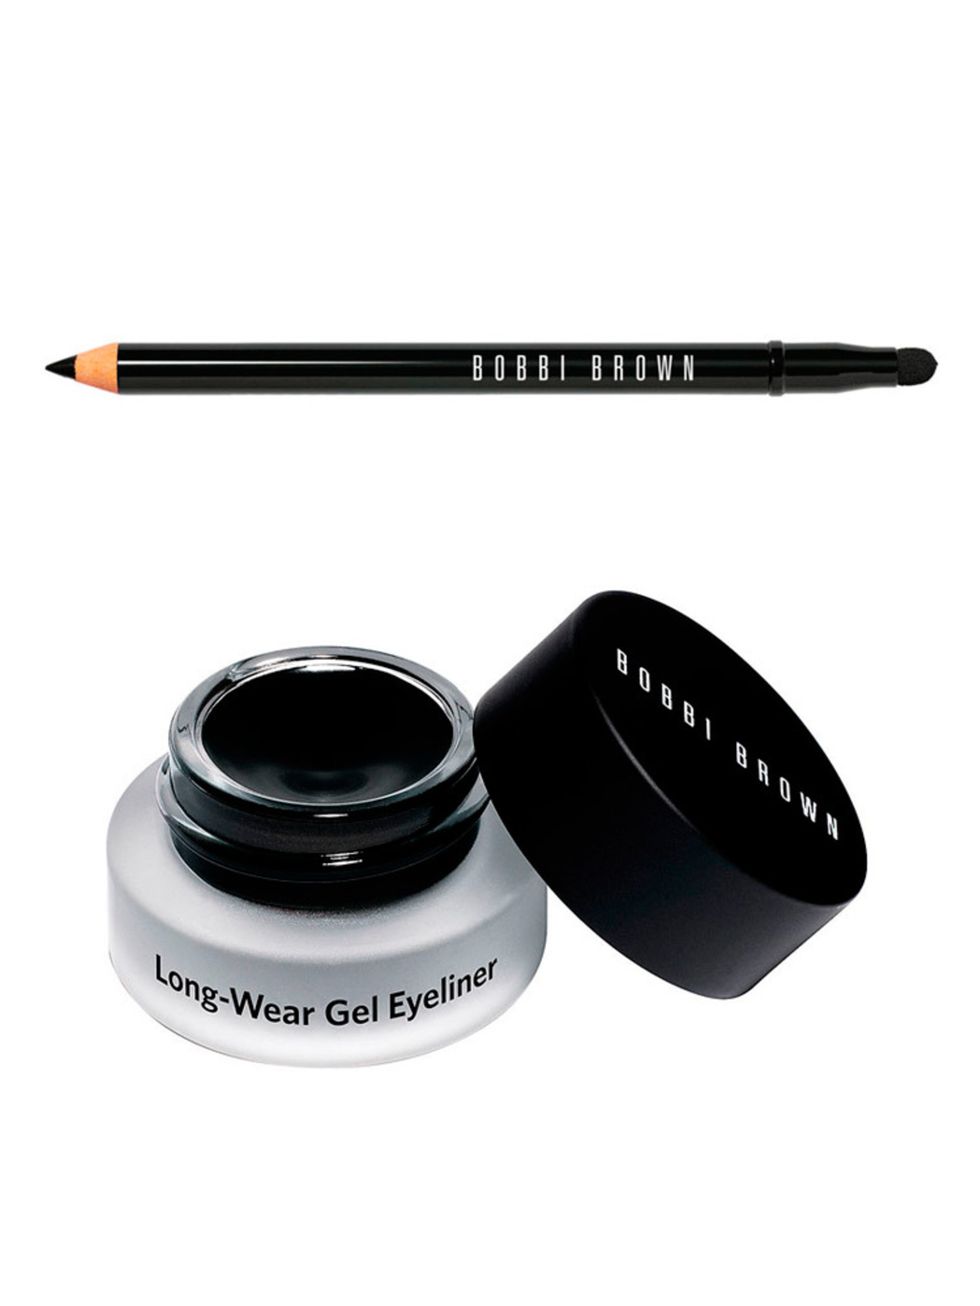 Apply a slick of gel liner along the upper lashline and subtly wing up and out. Use a kohl pencil to smudge under the lower lashes to soften the look.

Bobbi Brown Long-Wear Gel Eyeliner, £18 / Bobbi Brown Smokey Eye Kajal Liner, £18